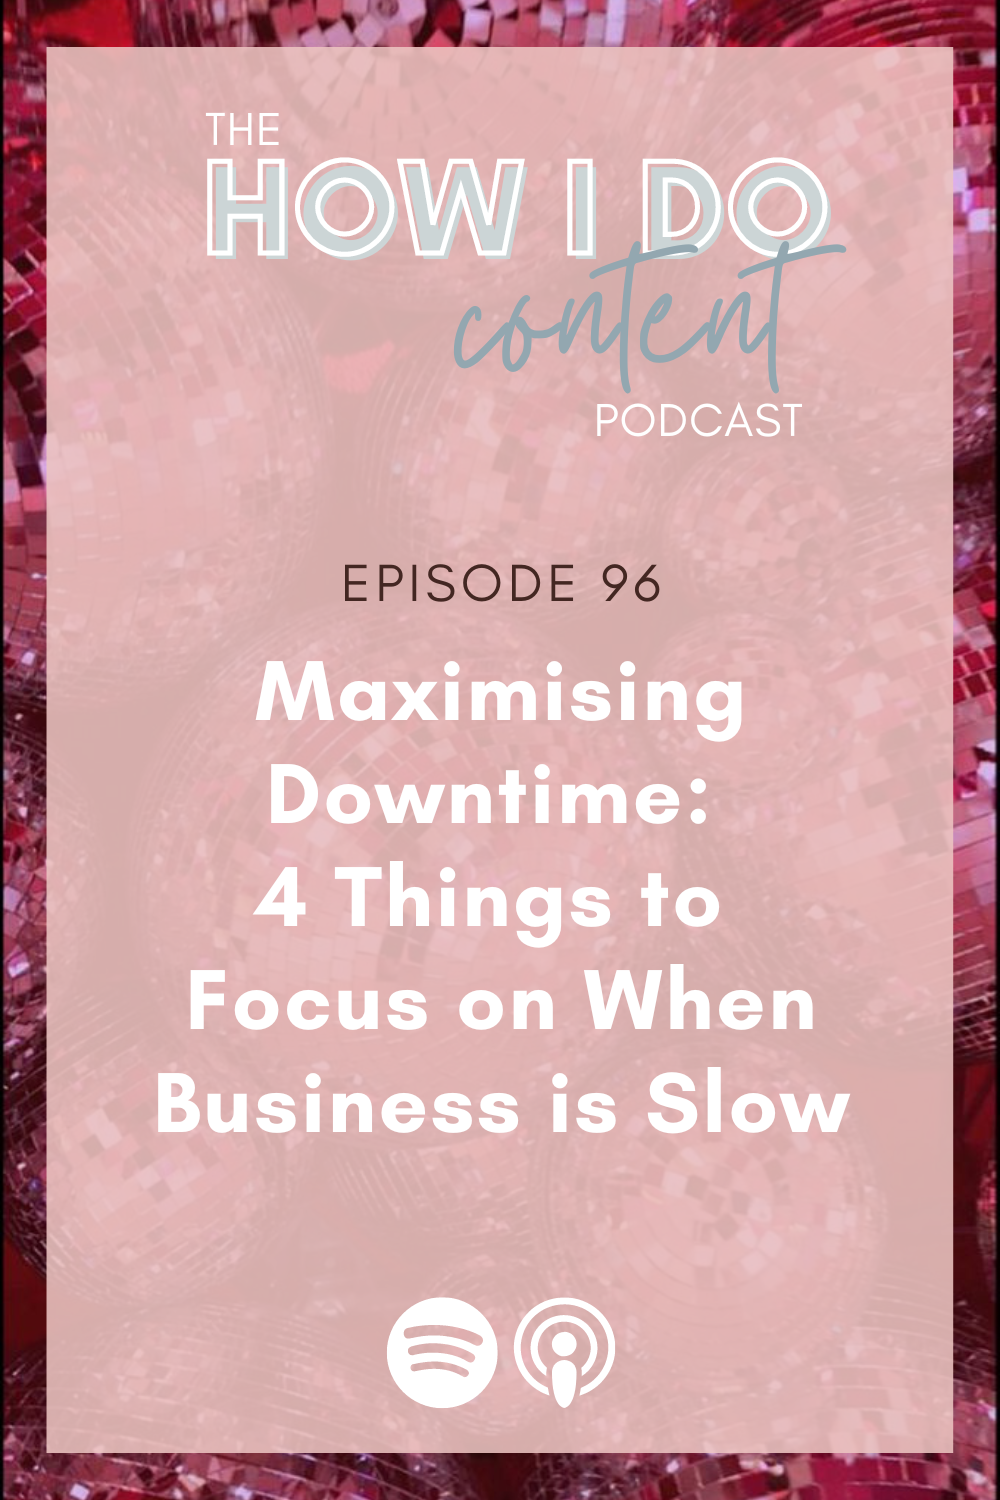 Maximising Downtime:<br />
4 Things to<br />
Focus on When Business is Slow